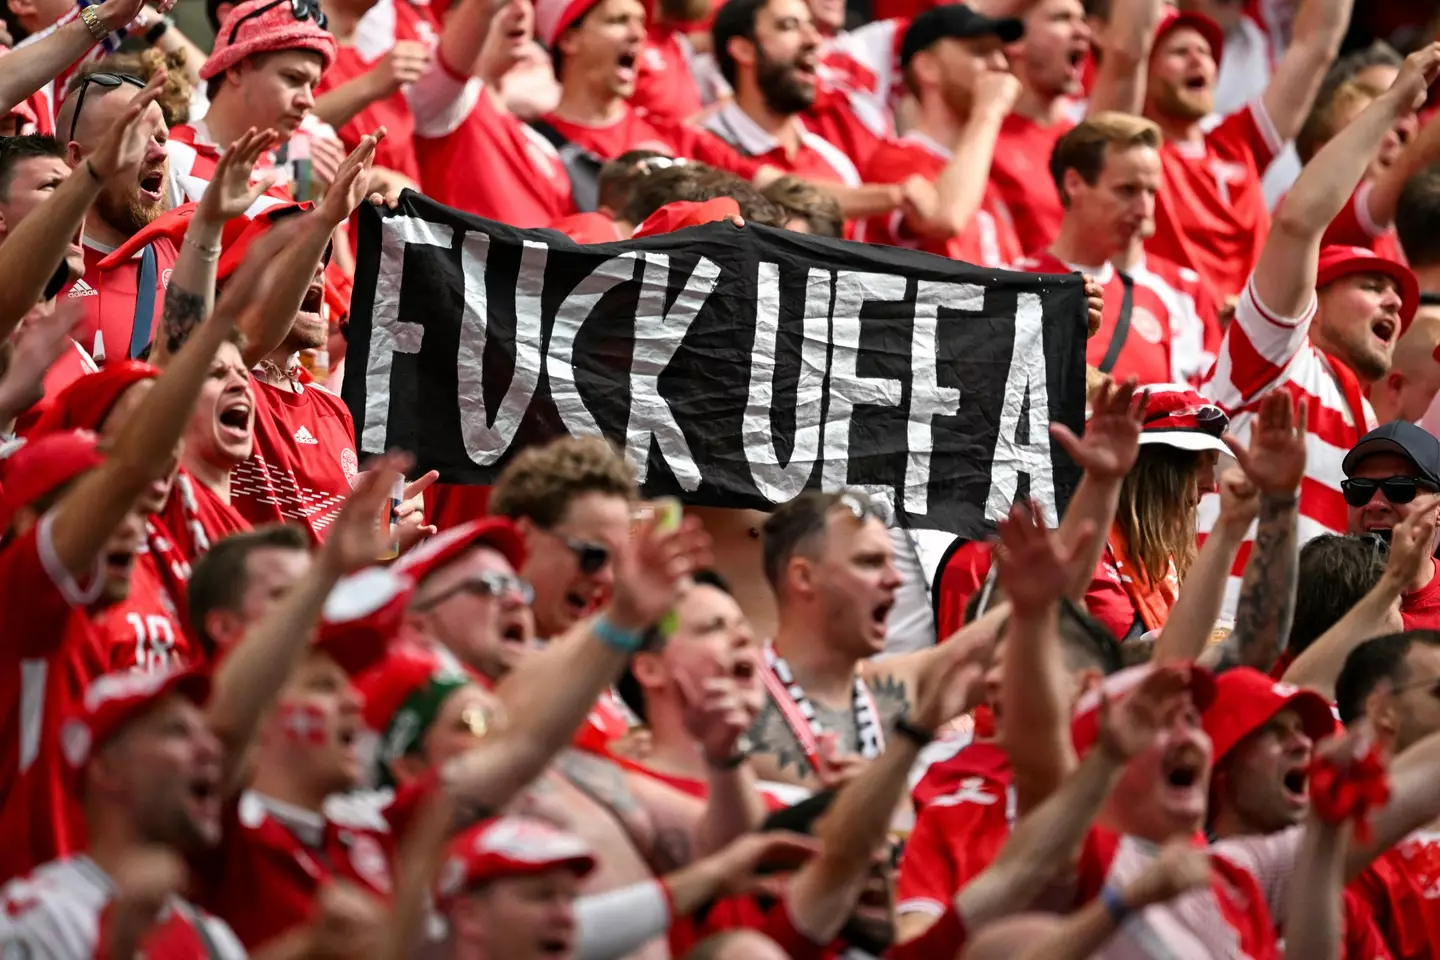 UEFA have deemed the banner 'illegal' (Getty)